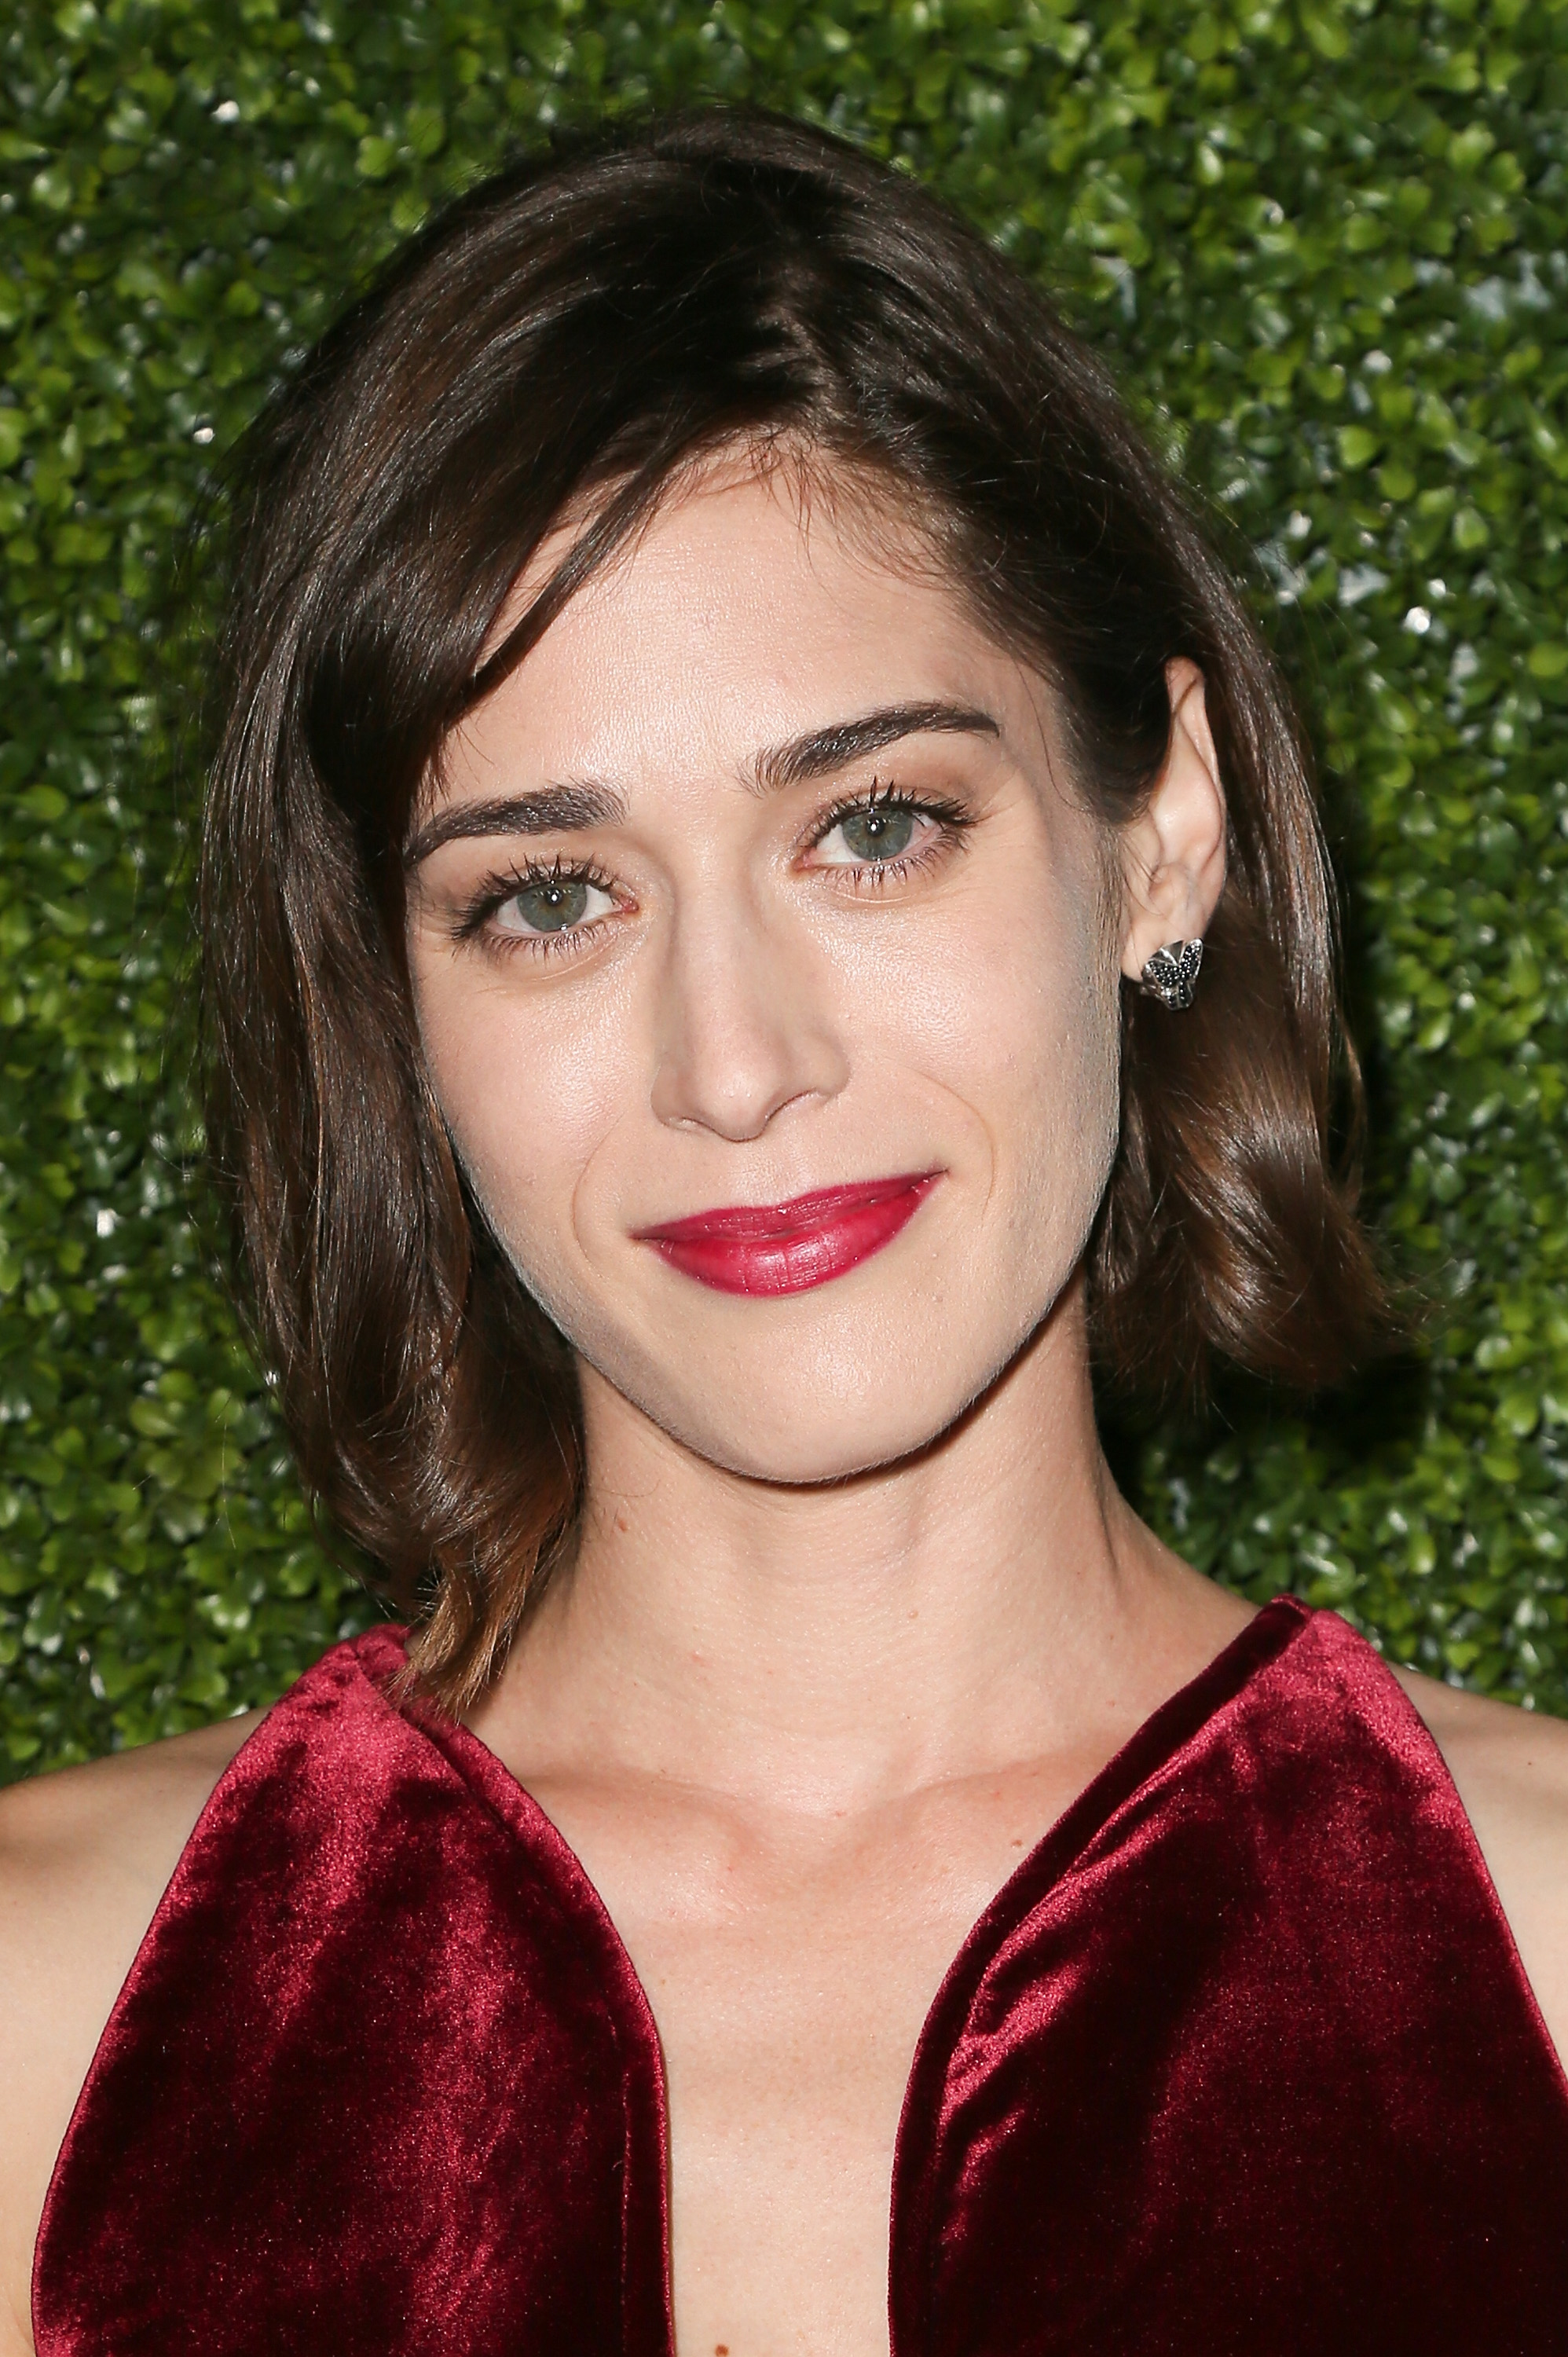 WEST HOLLYWOOD, CA - AUGUST 10: Actress Lizzy Caplan arrives at the CBS, CW, Showtime Summer TCA Party at the Pacific Design Center on August 10, 2016 in West Hollywood, California. | Source: Getty Images